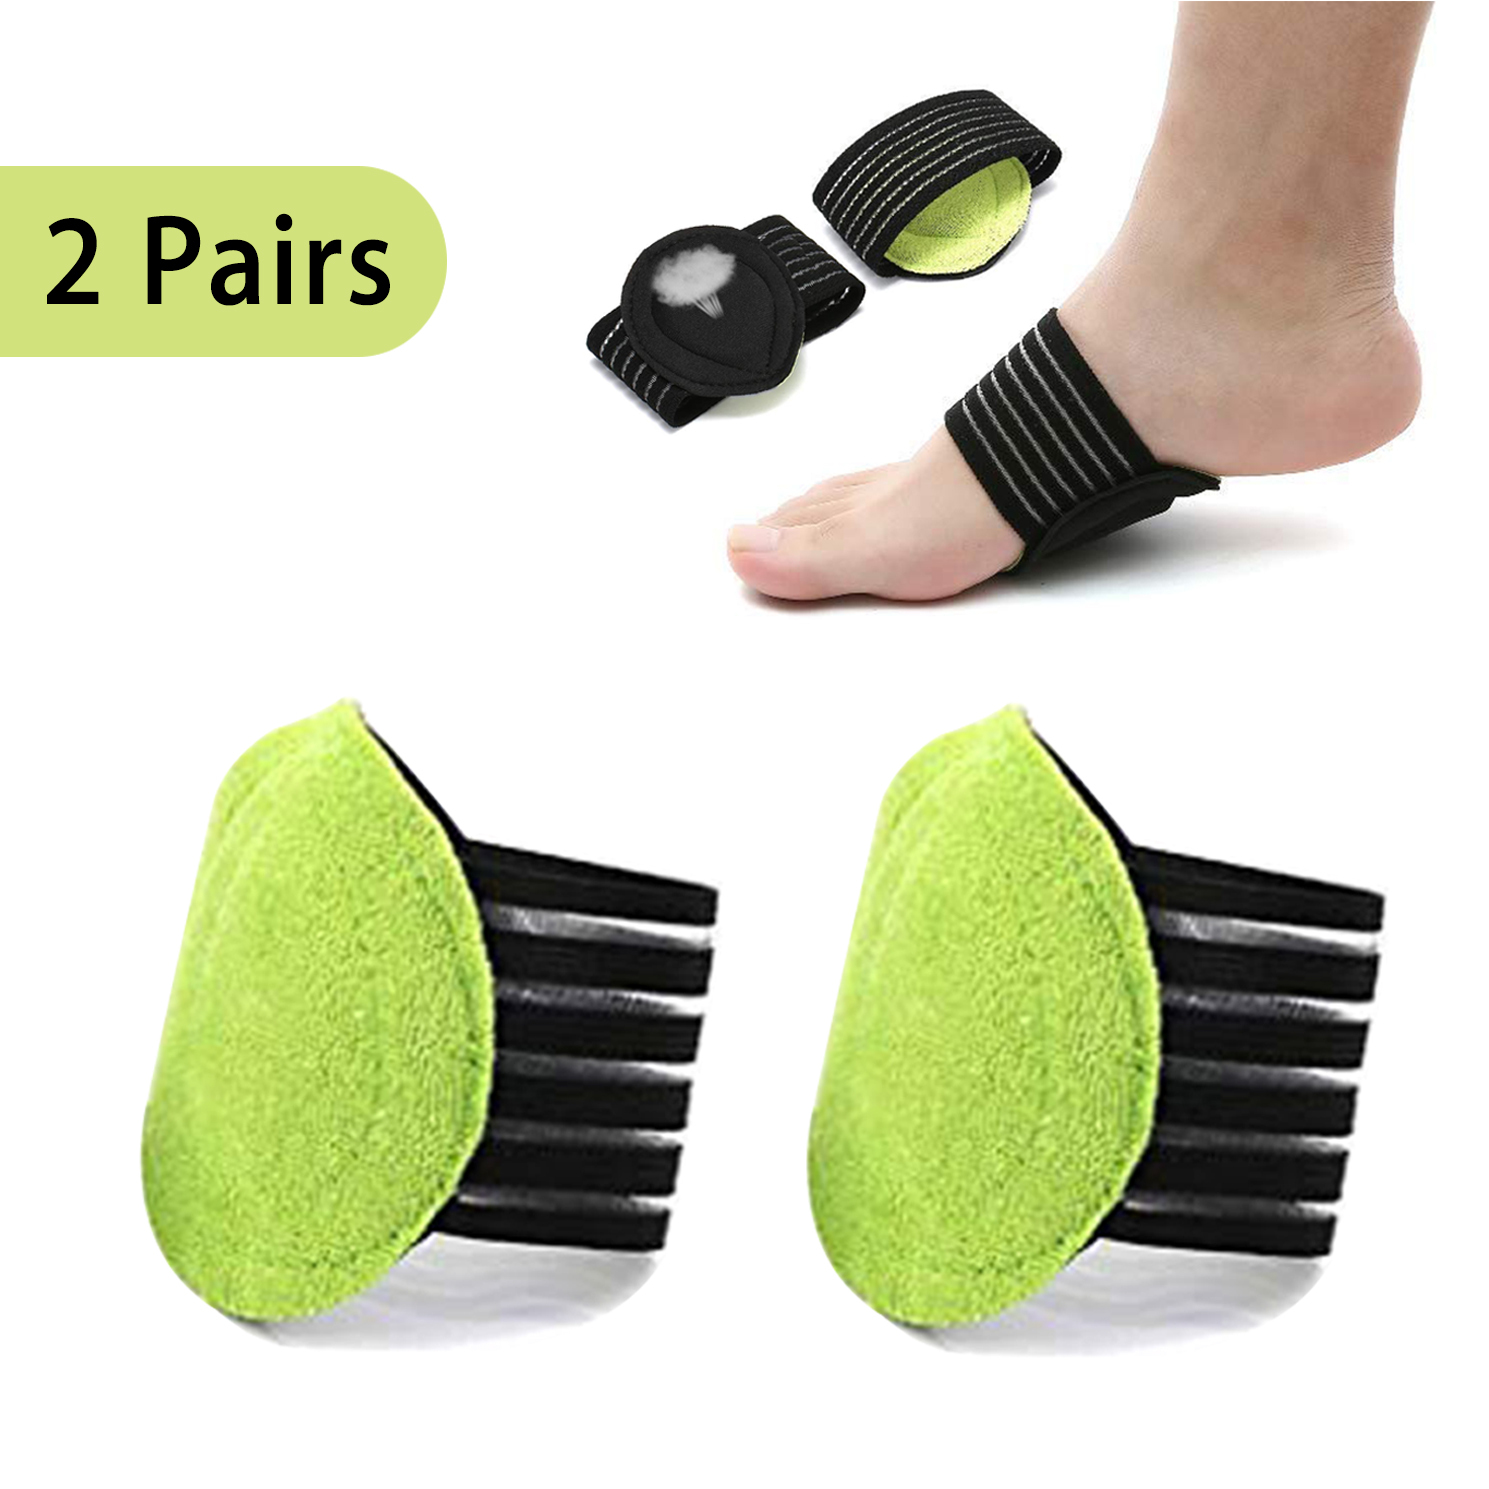 for Men /& Women Flat Feet 5 Pair Arch Support Brace Compression Cushioned Support Sleeves Heel Fatigue Achy Feet Problems Plantar Fasciitis Foot Pain Relief for Fallen Arches Universal Size